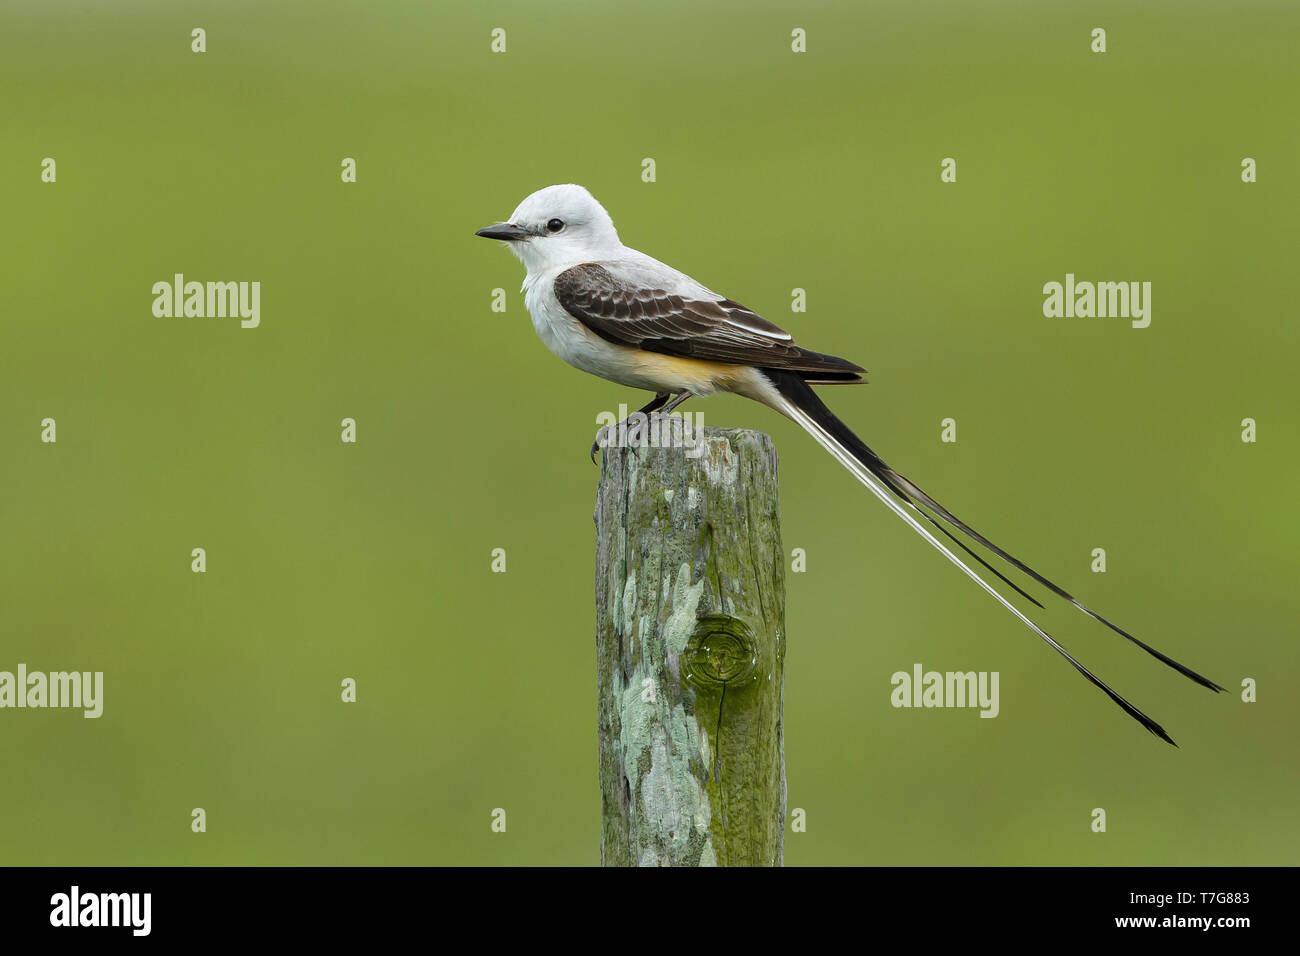 Adult male Scissor-tailed Flycatcher (Tyrannus forficatus) perched on a wooden pole in Galveston Co., Texas, USA. Stock Photo